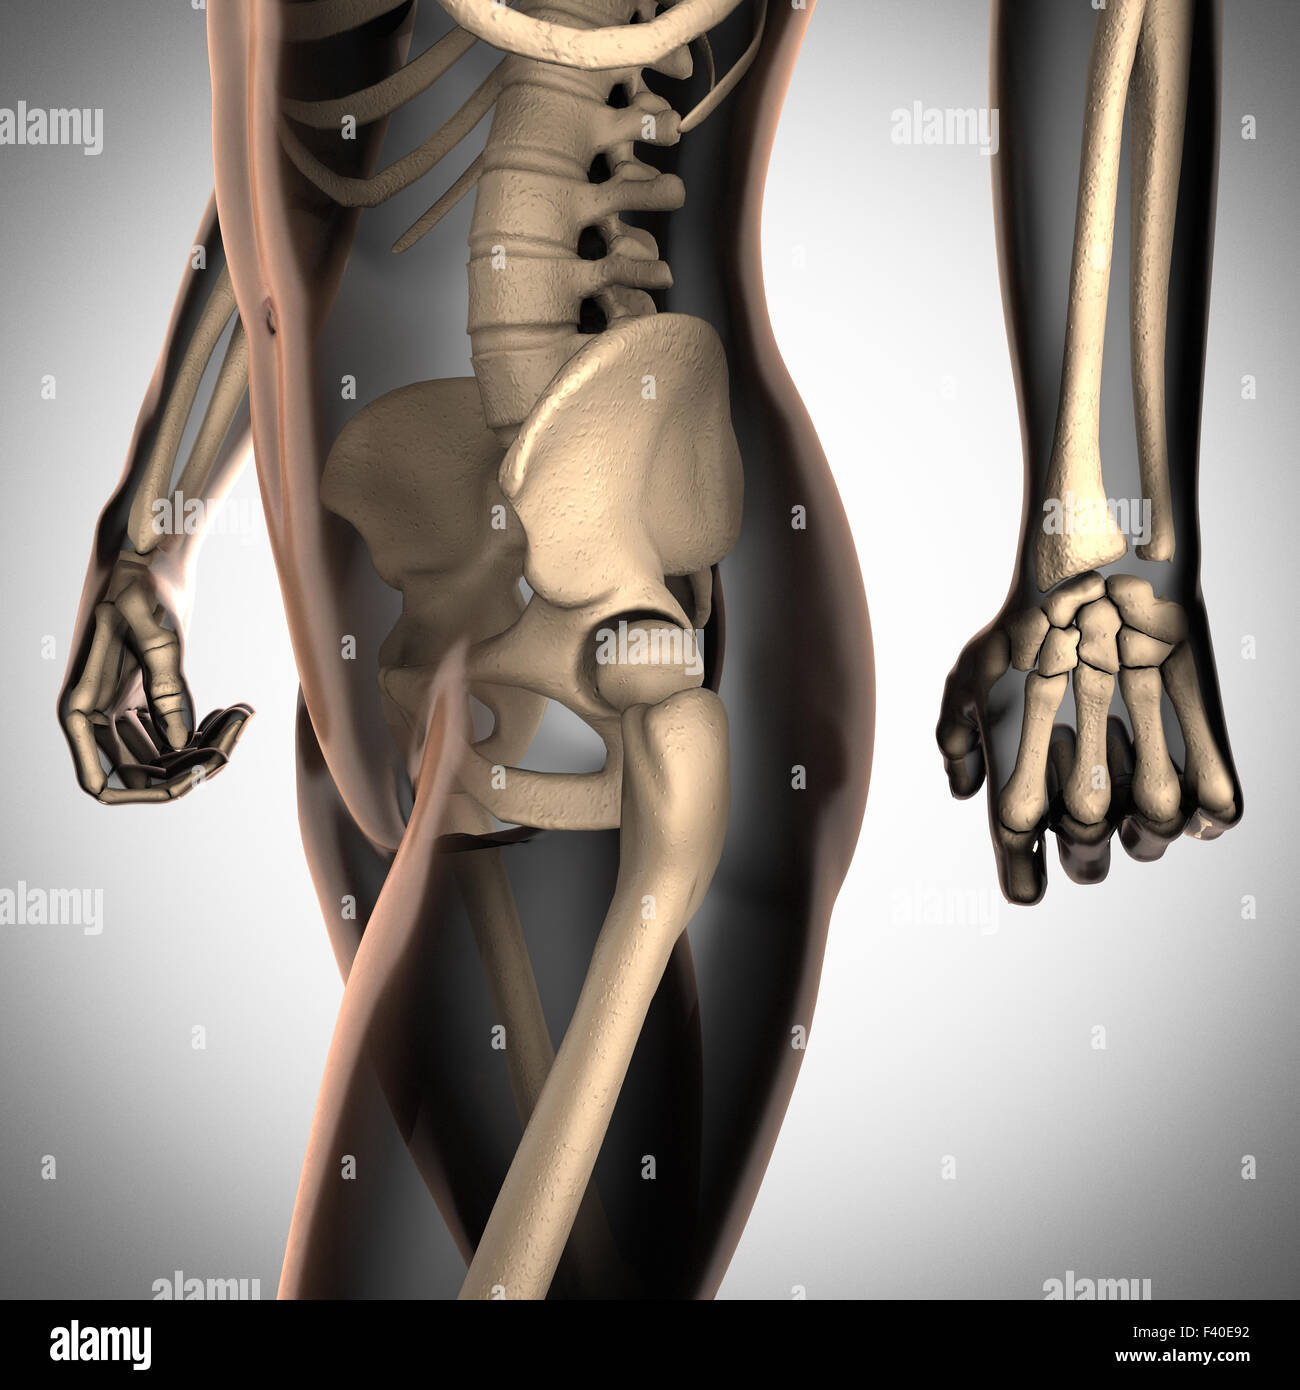 human radiography scan  with bones Stock Photo